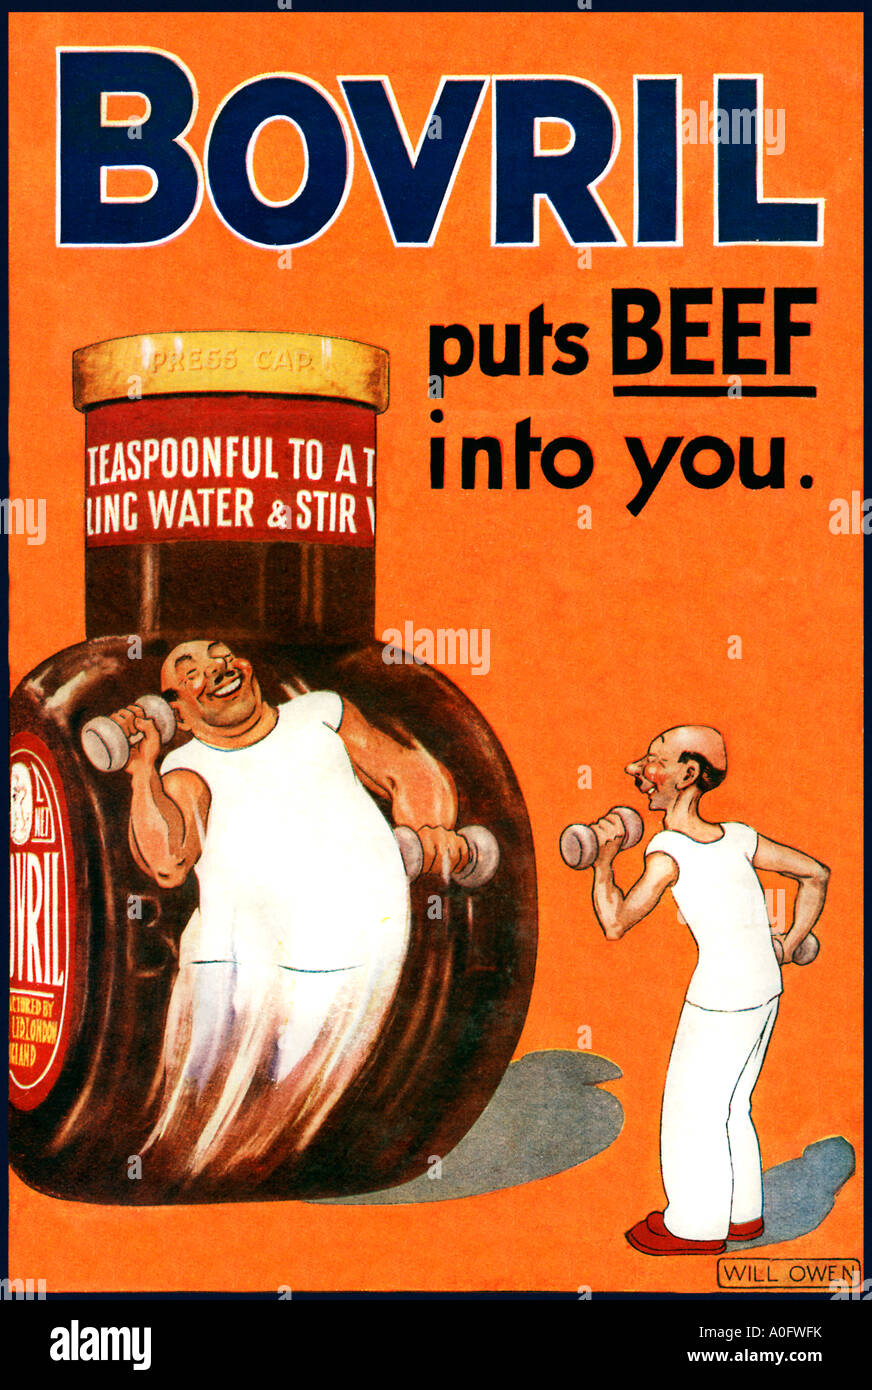 Bovril Puts Beef Into You 1925 advert for the popular English beef extract used for drinking and cooking Stock Photo